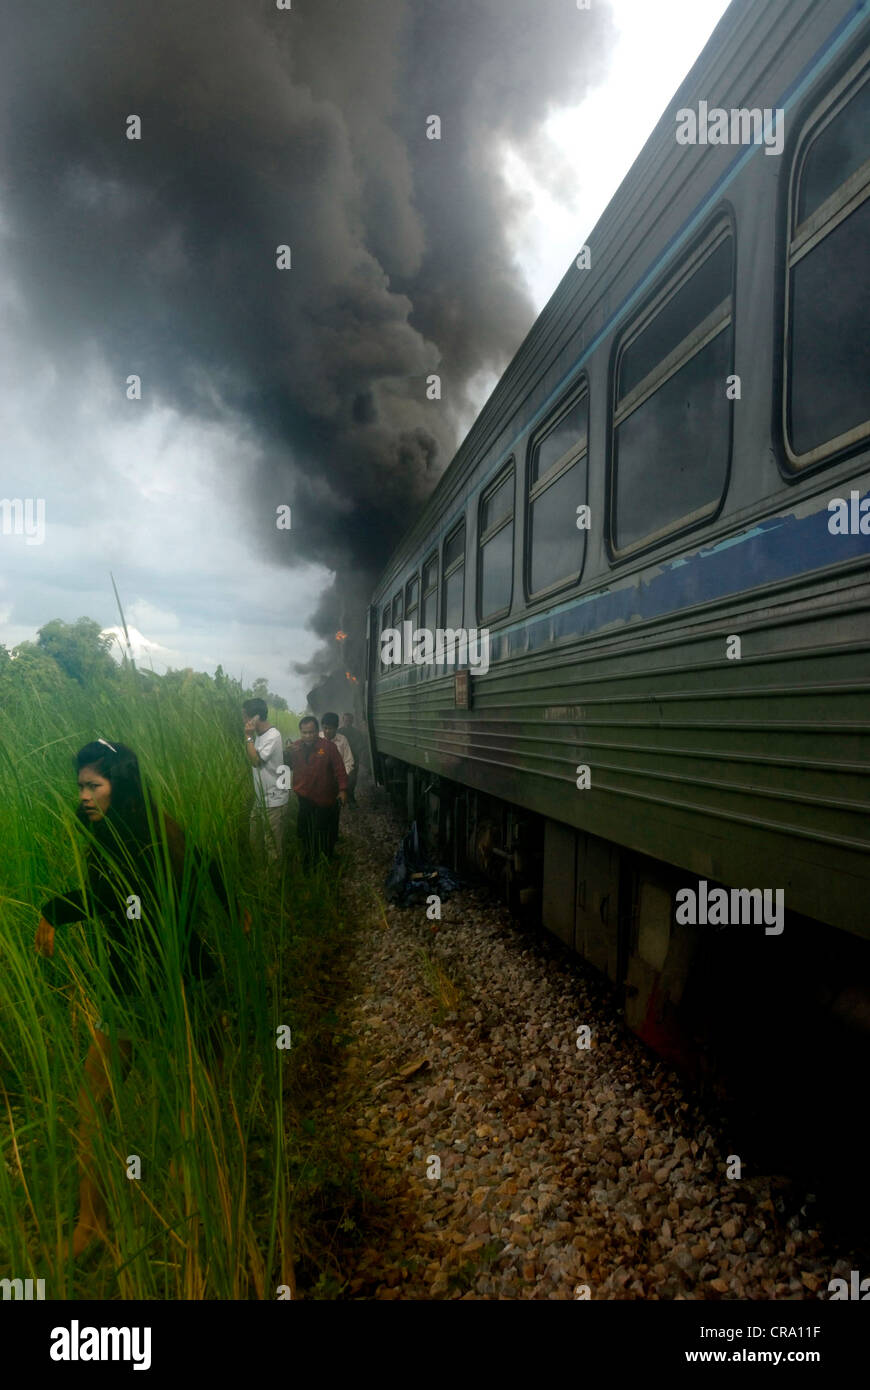 Passengers running from the burning train minutes after it crashed in Phitsanulok on 14/06/2011 in Phitsanulok Thailand Stock Photo